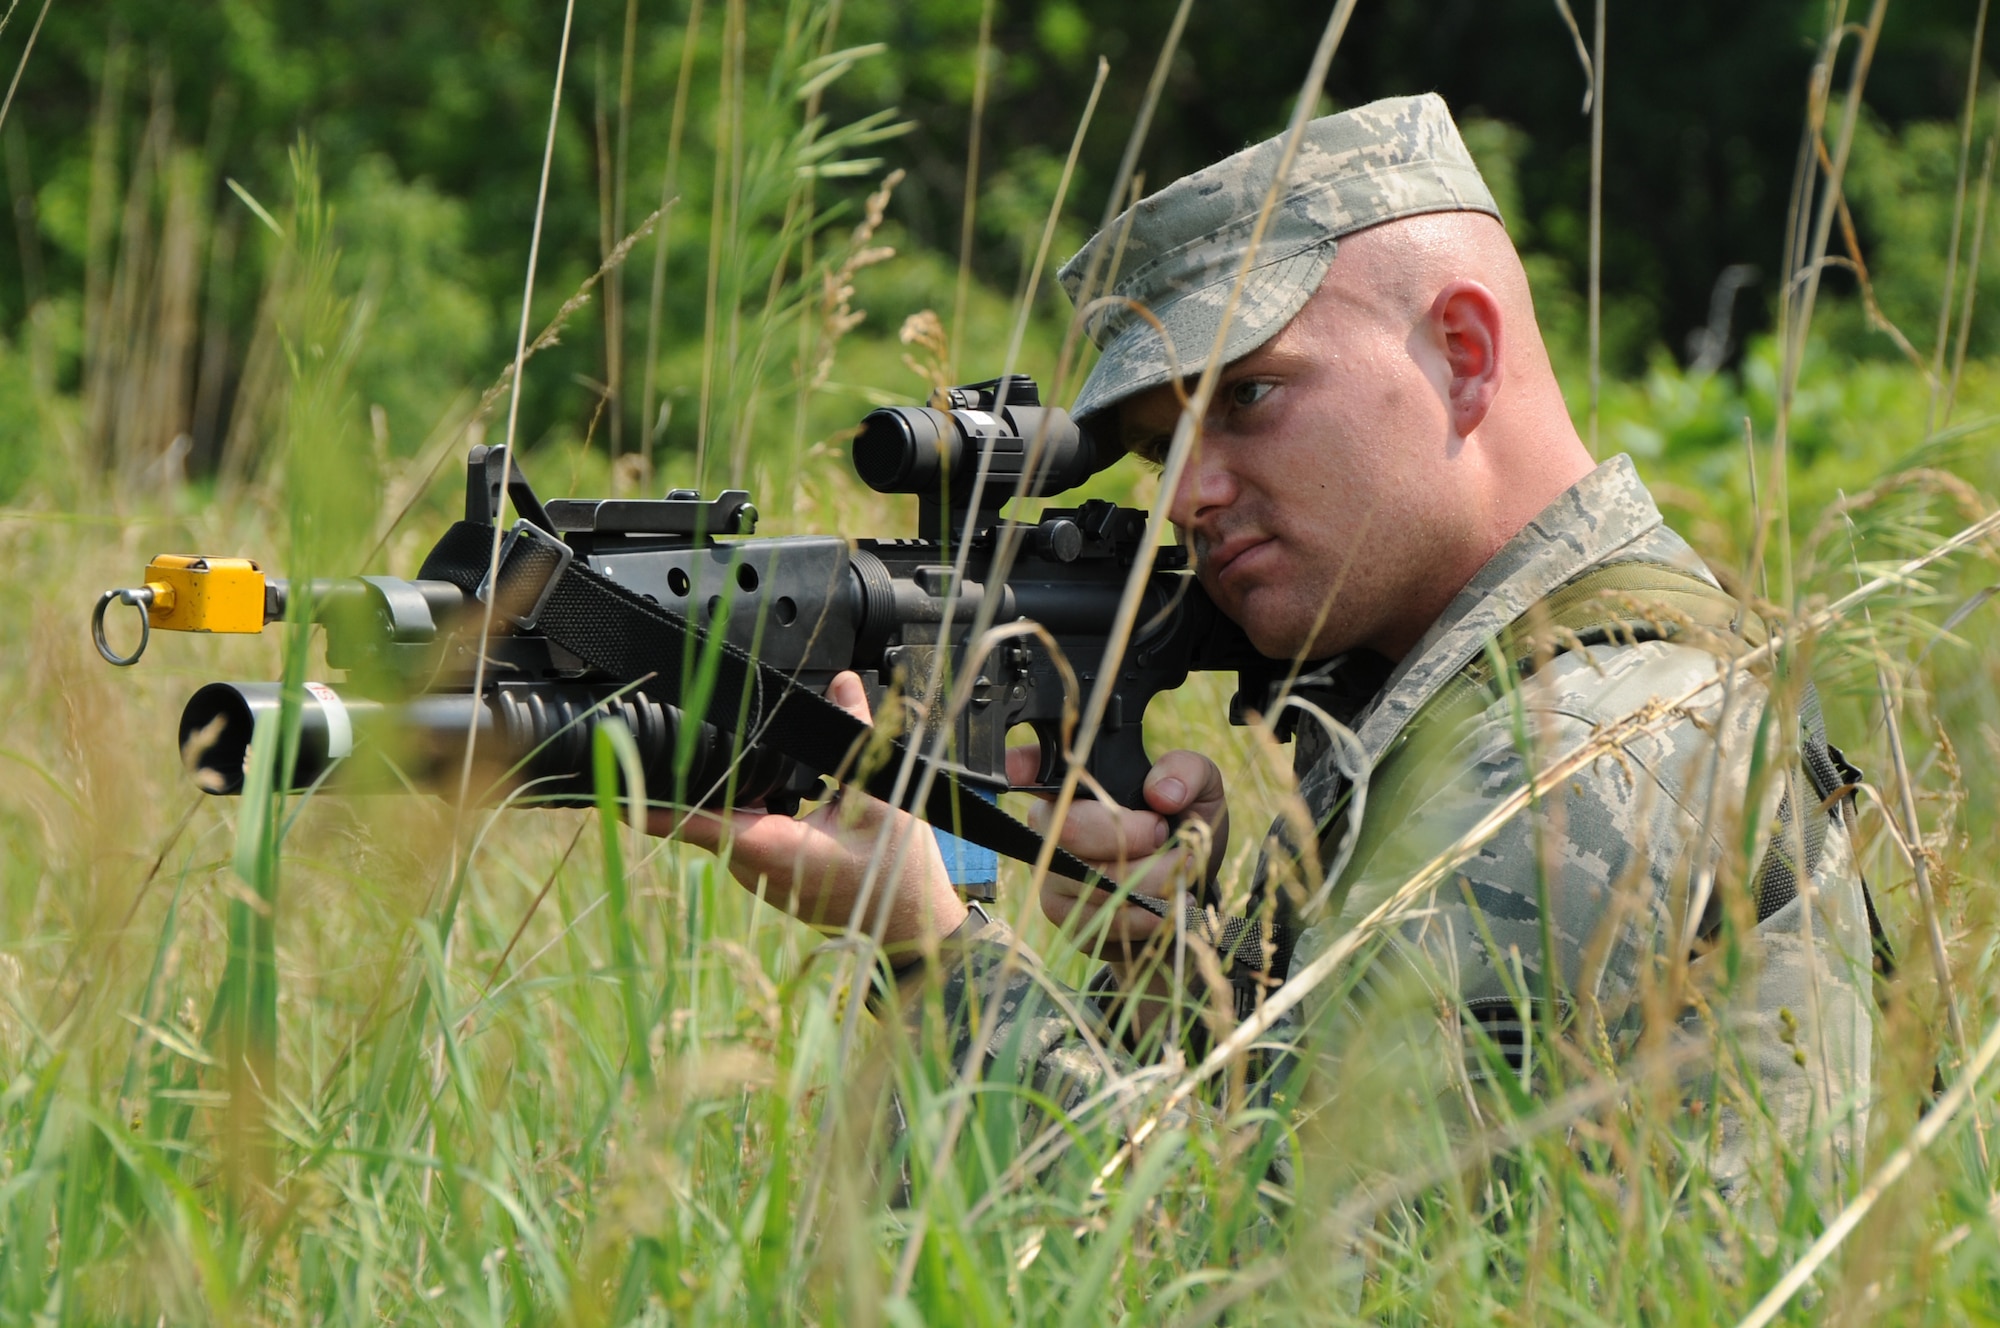 Providing Cover: Senior Airman Tyson Pierce, a fire team member with the 155th Security Forces Squadron, keeps lookout during a field patrol exercise at Camp Ashland, Neb., June 6. The members of the 155th SFS performed a field training training exercise during their annual training to conduct combat skills training 